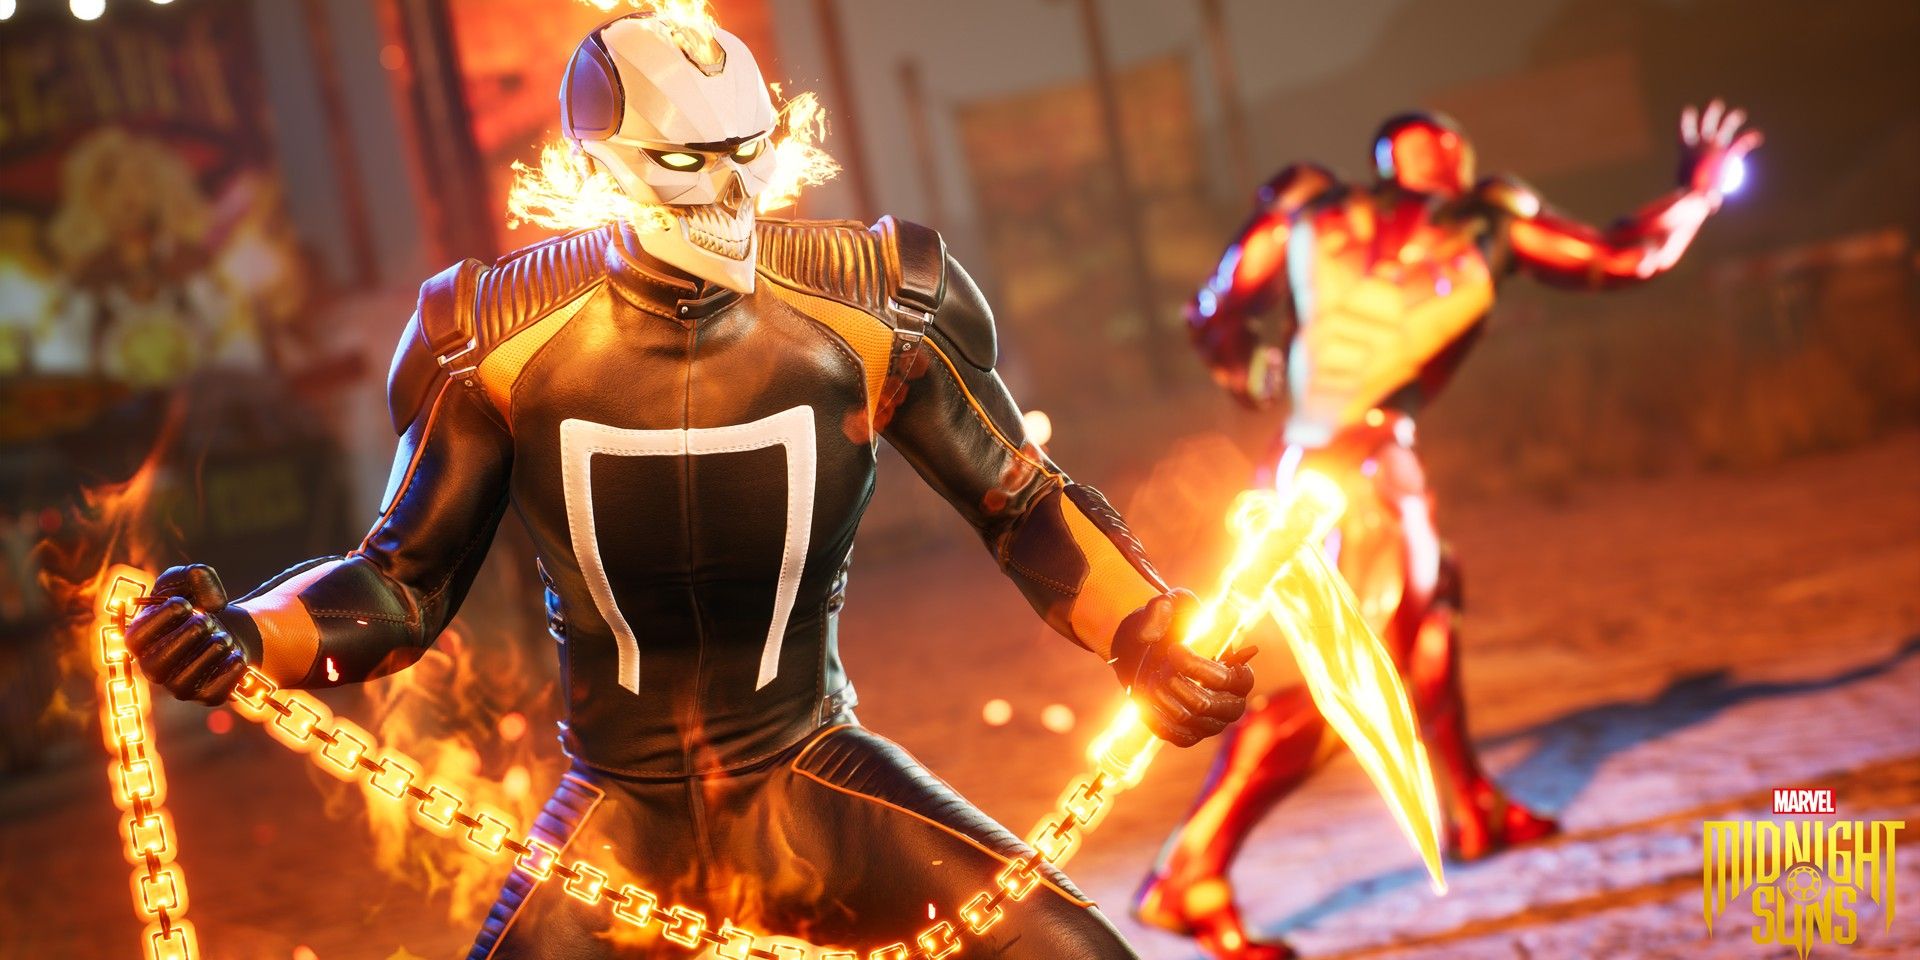 Marvel’s Midnight Suns Gets Game Rating, Could Release Soon